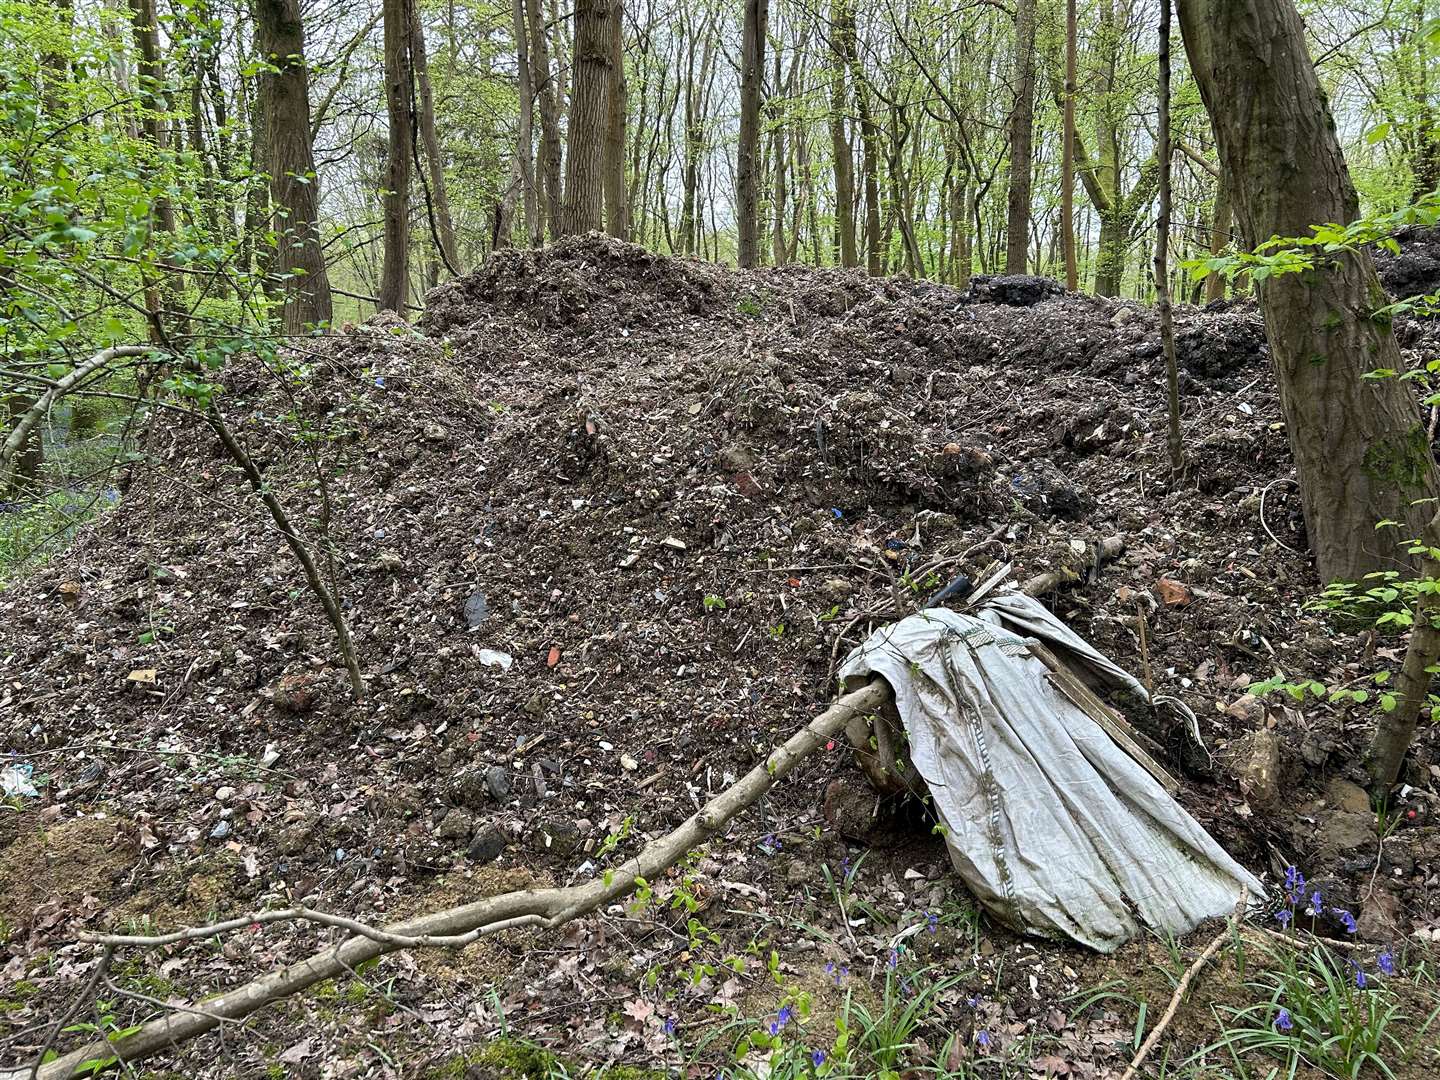 Plot owners in the woods say they are ‘disgusted’ with the response from the authorities